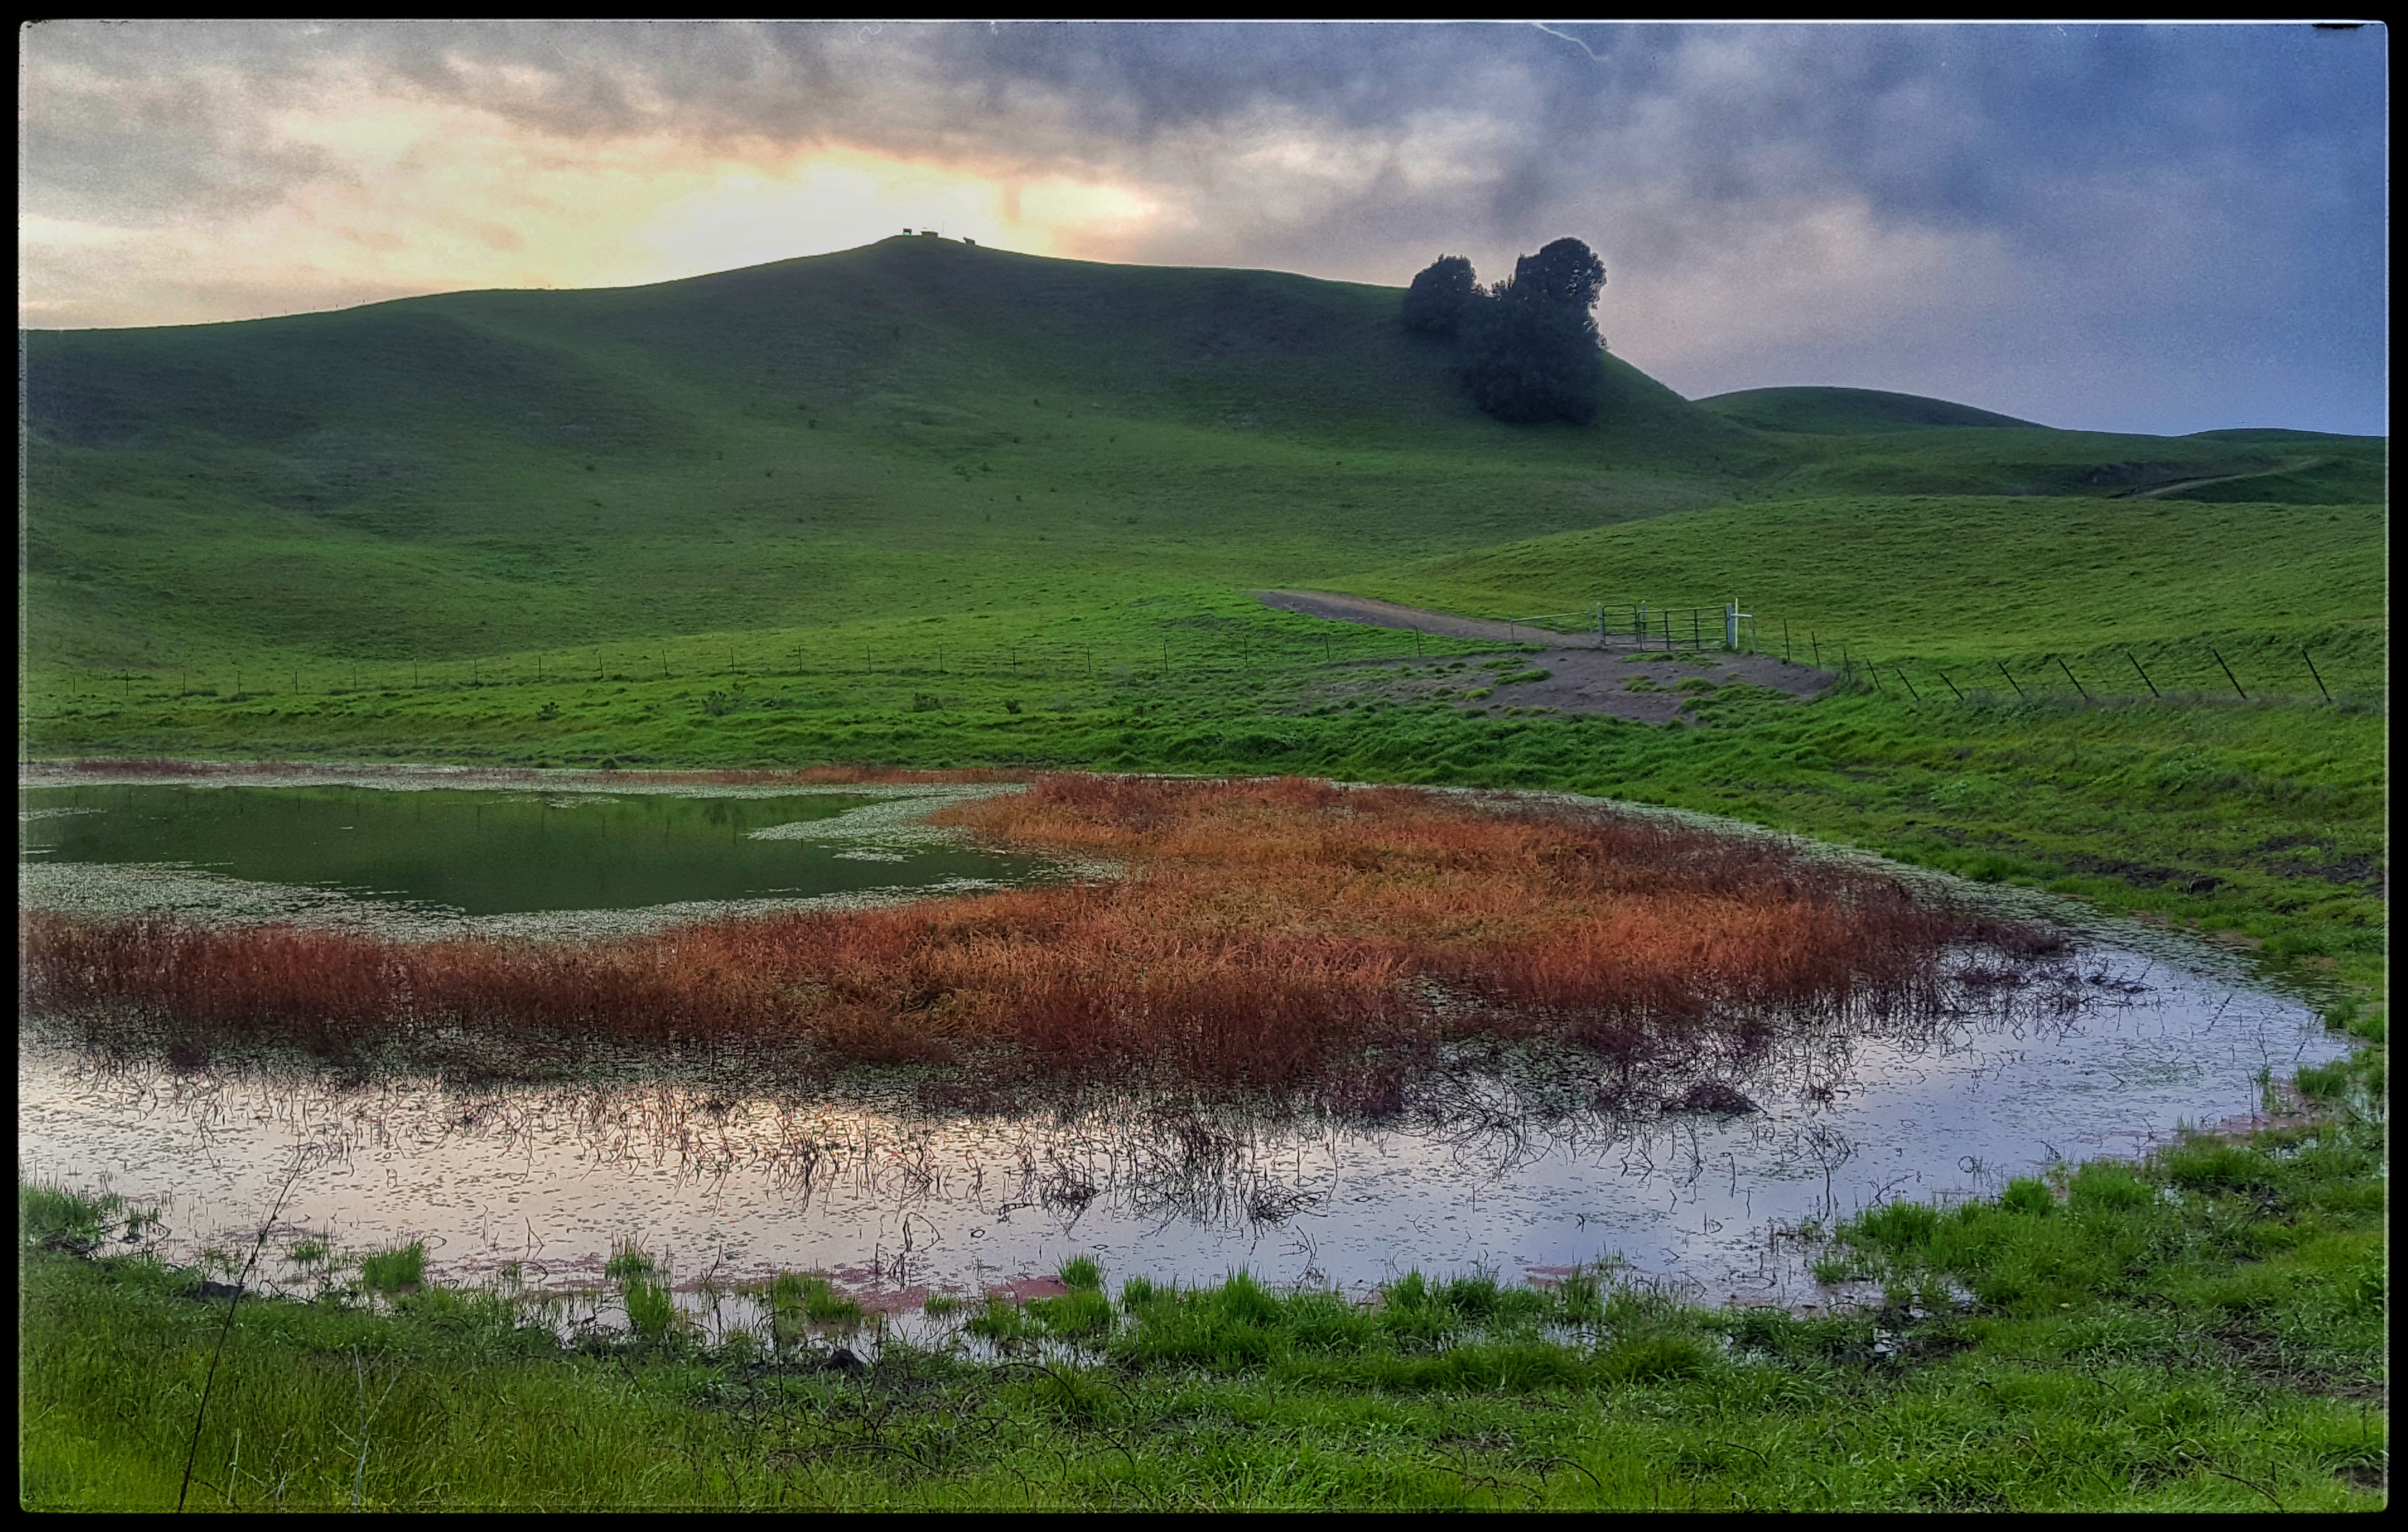 Image: Sunset over Mott Peak and the the 'Mickey Mouse' tree along the Briones Crest, Briones Regional Park, California